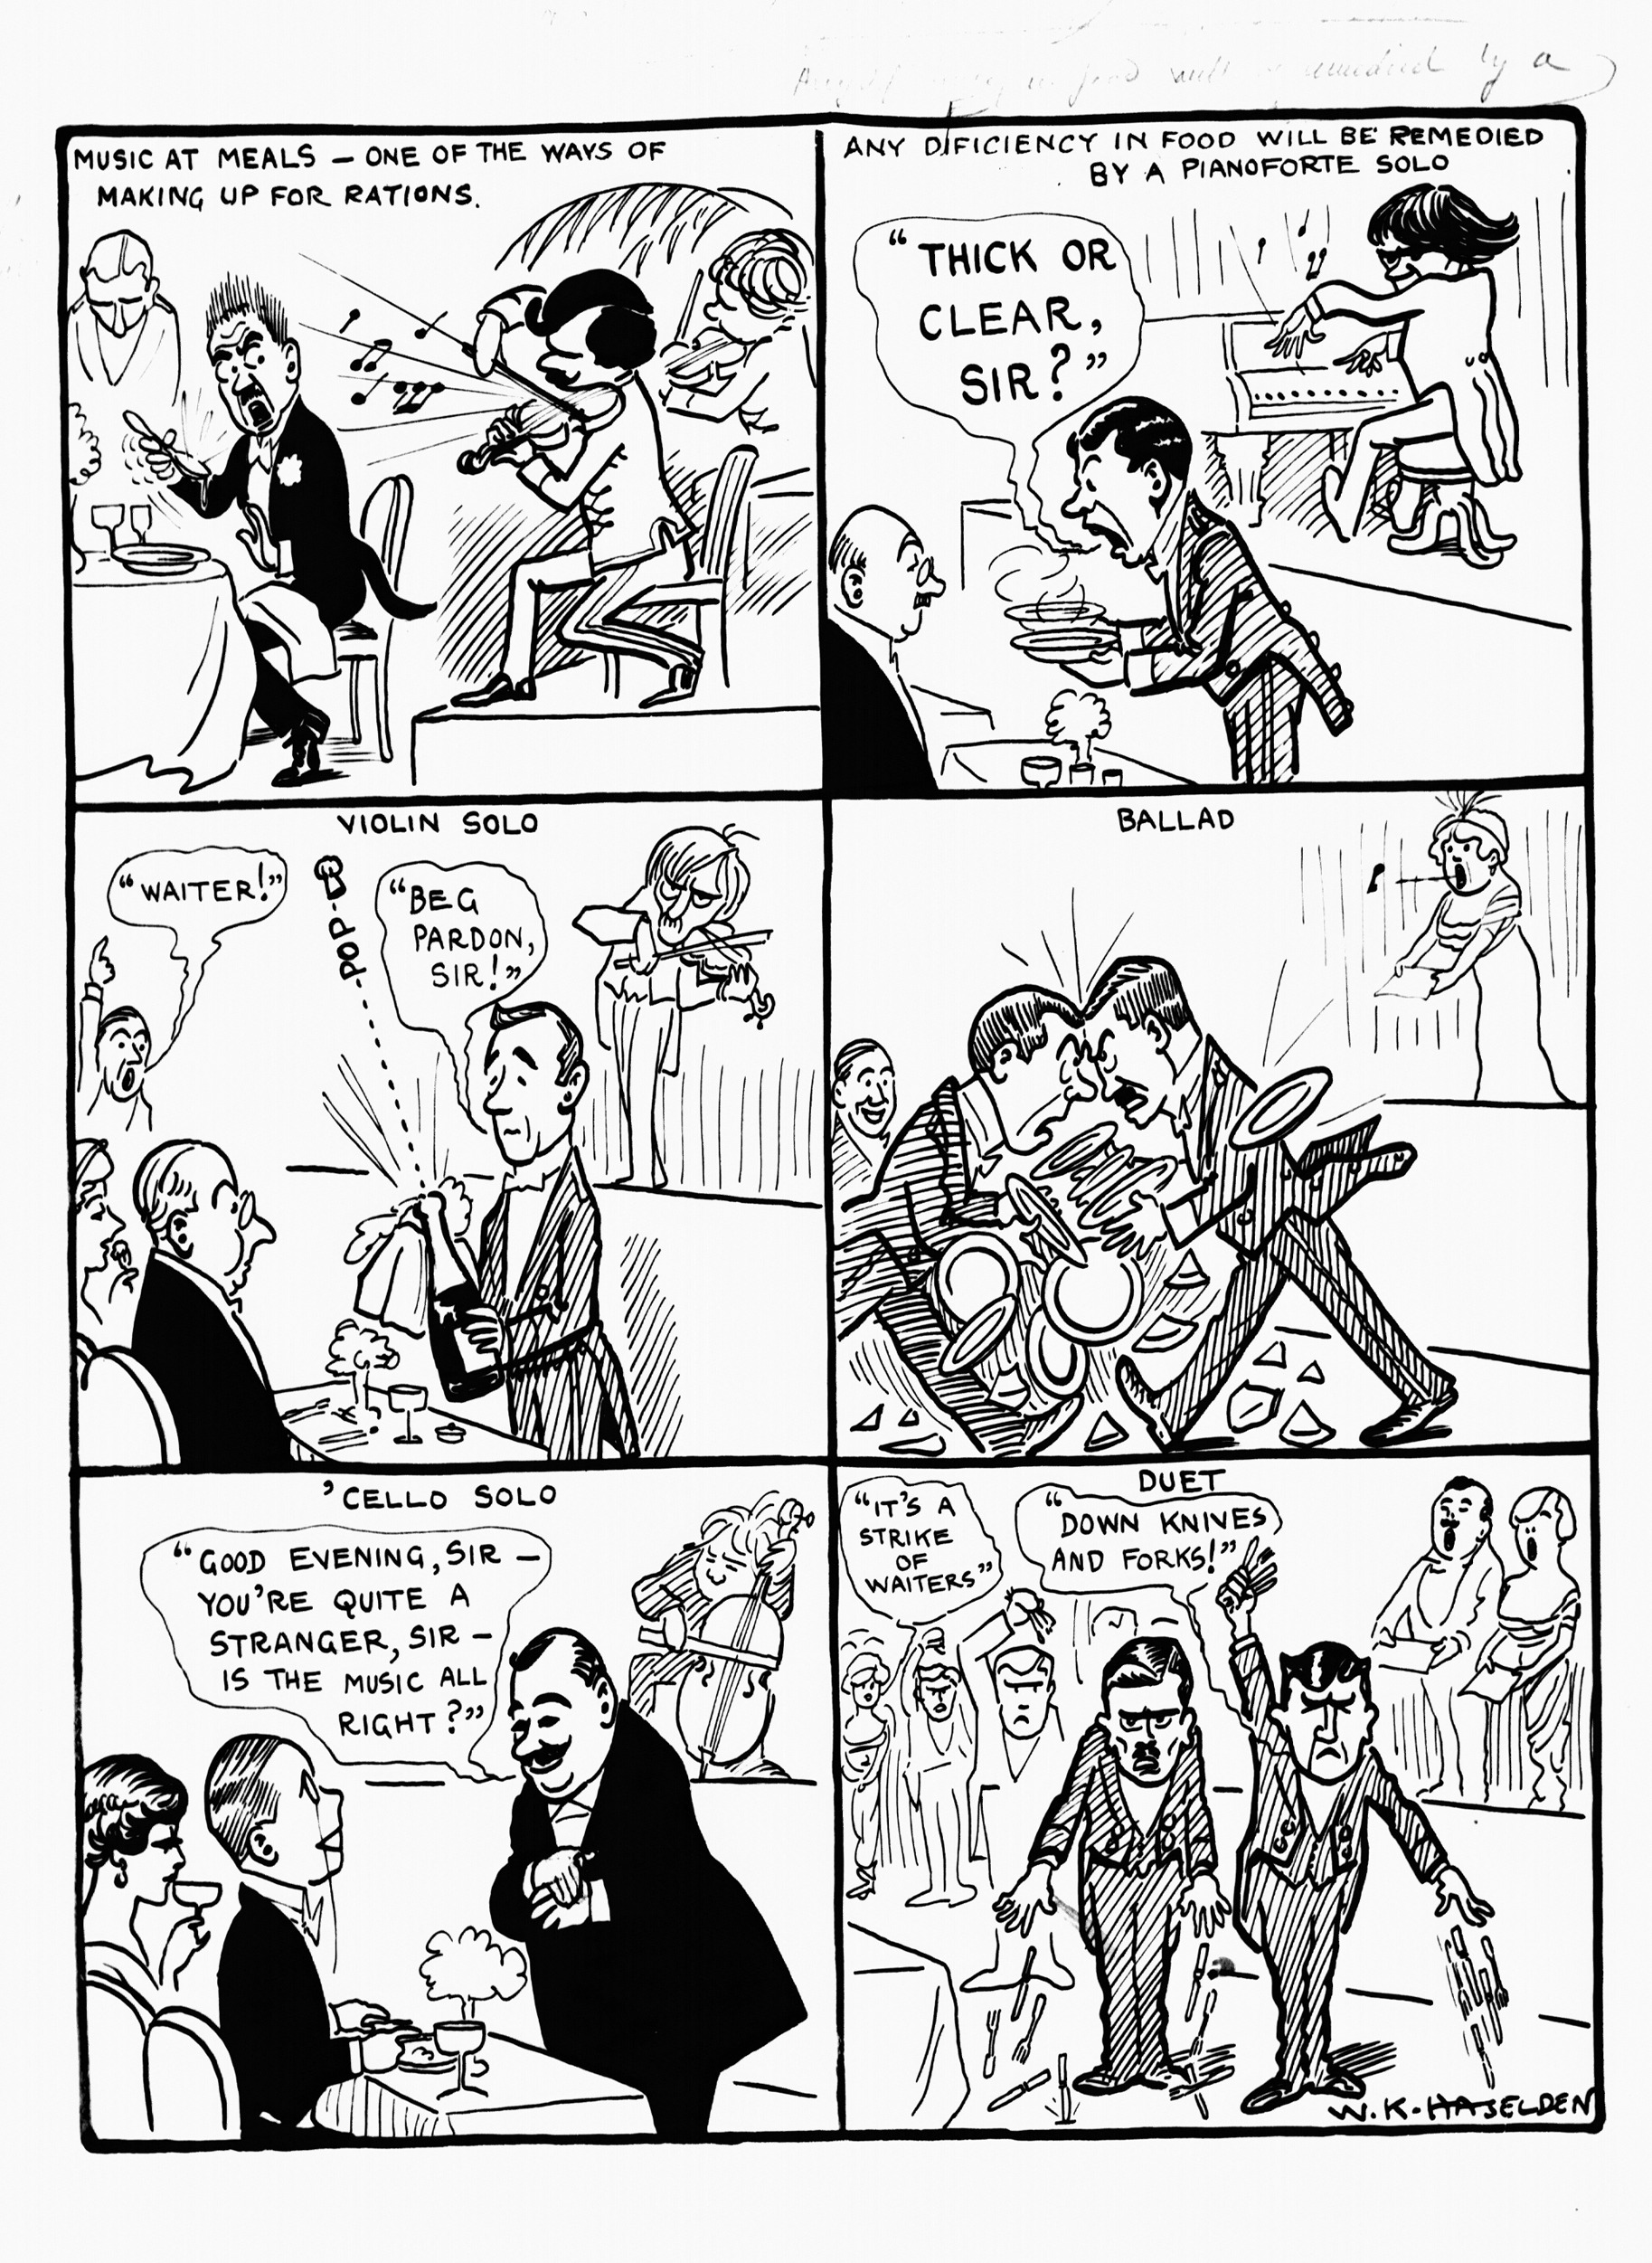 Cartoon by W.K. Haselden showing the excesses of combining musical performance with food